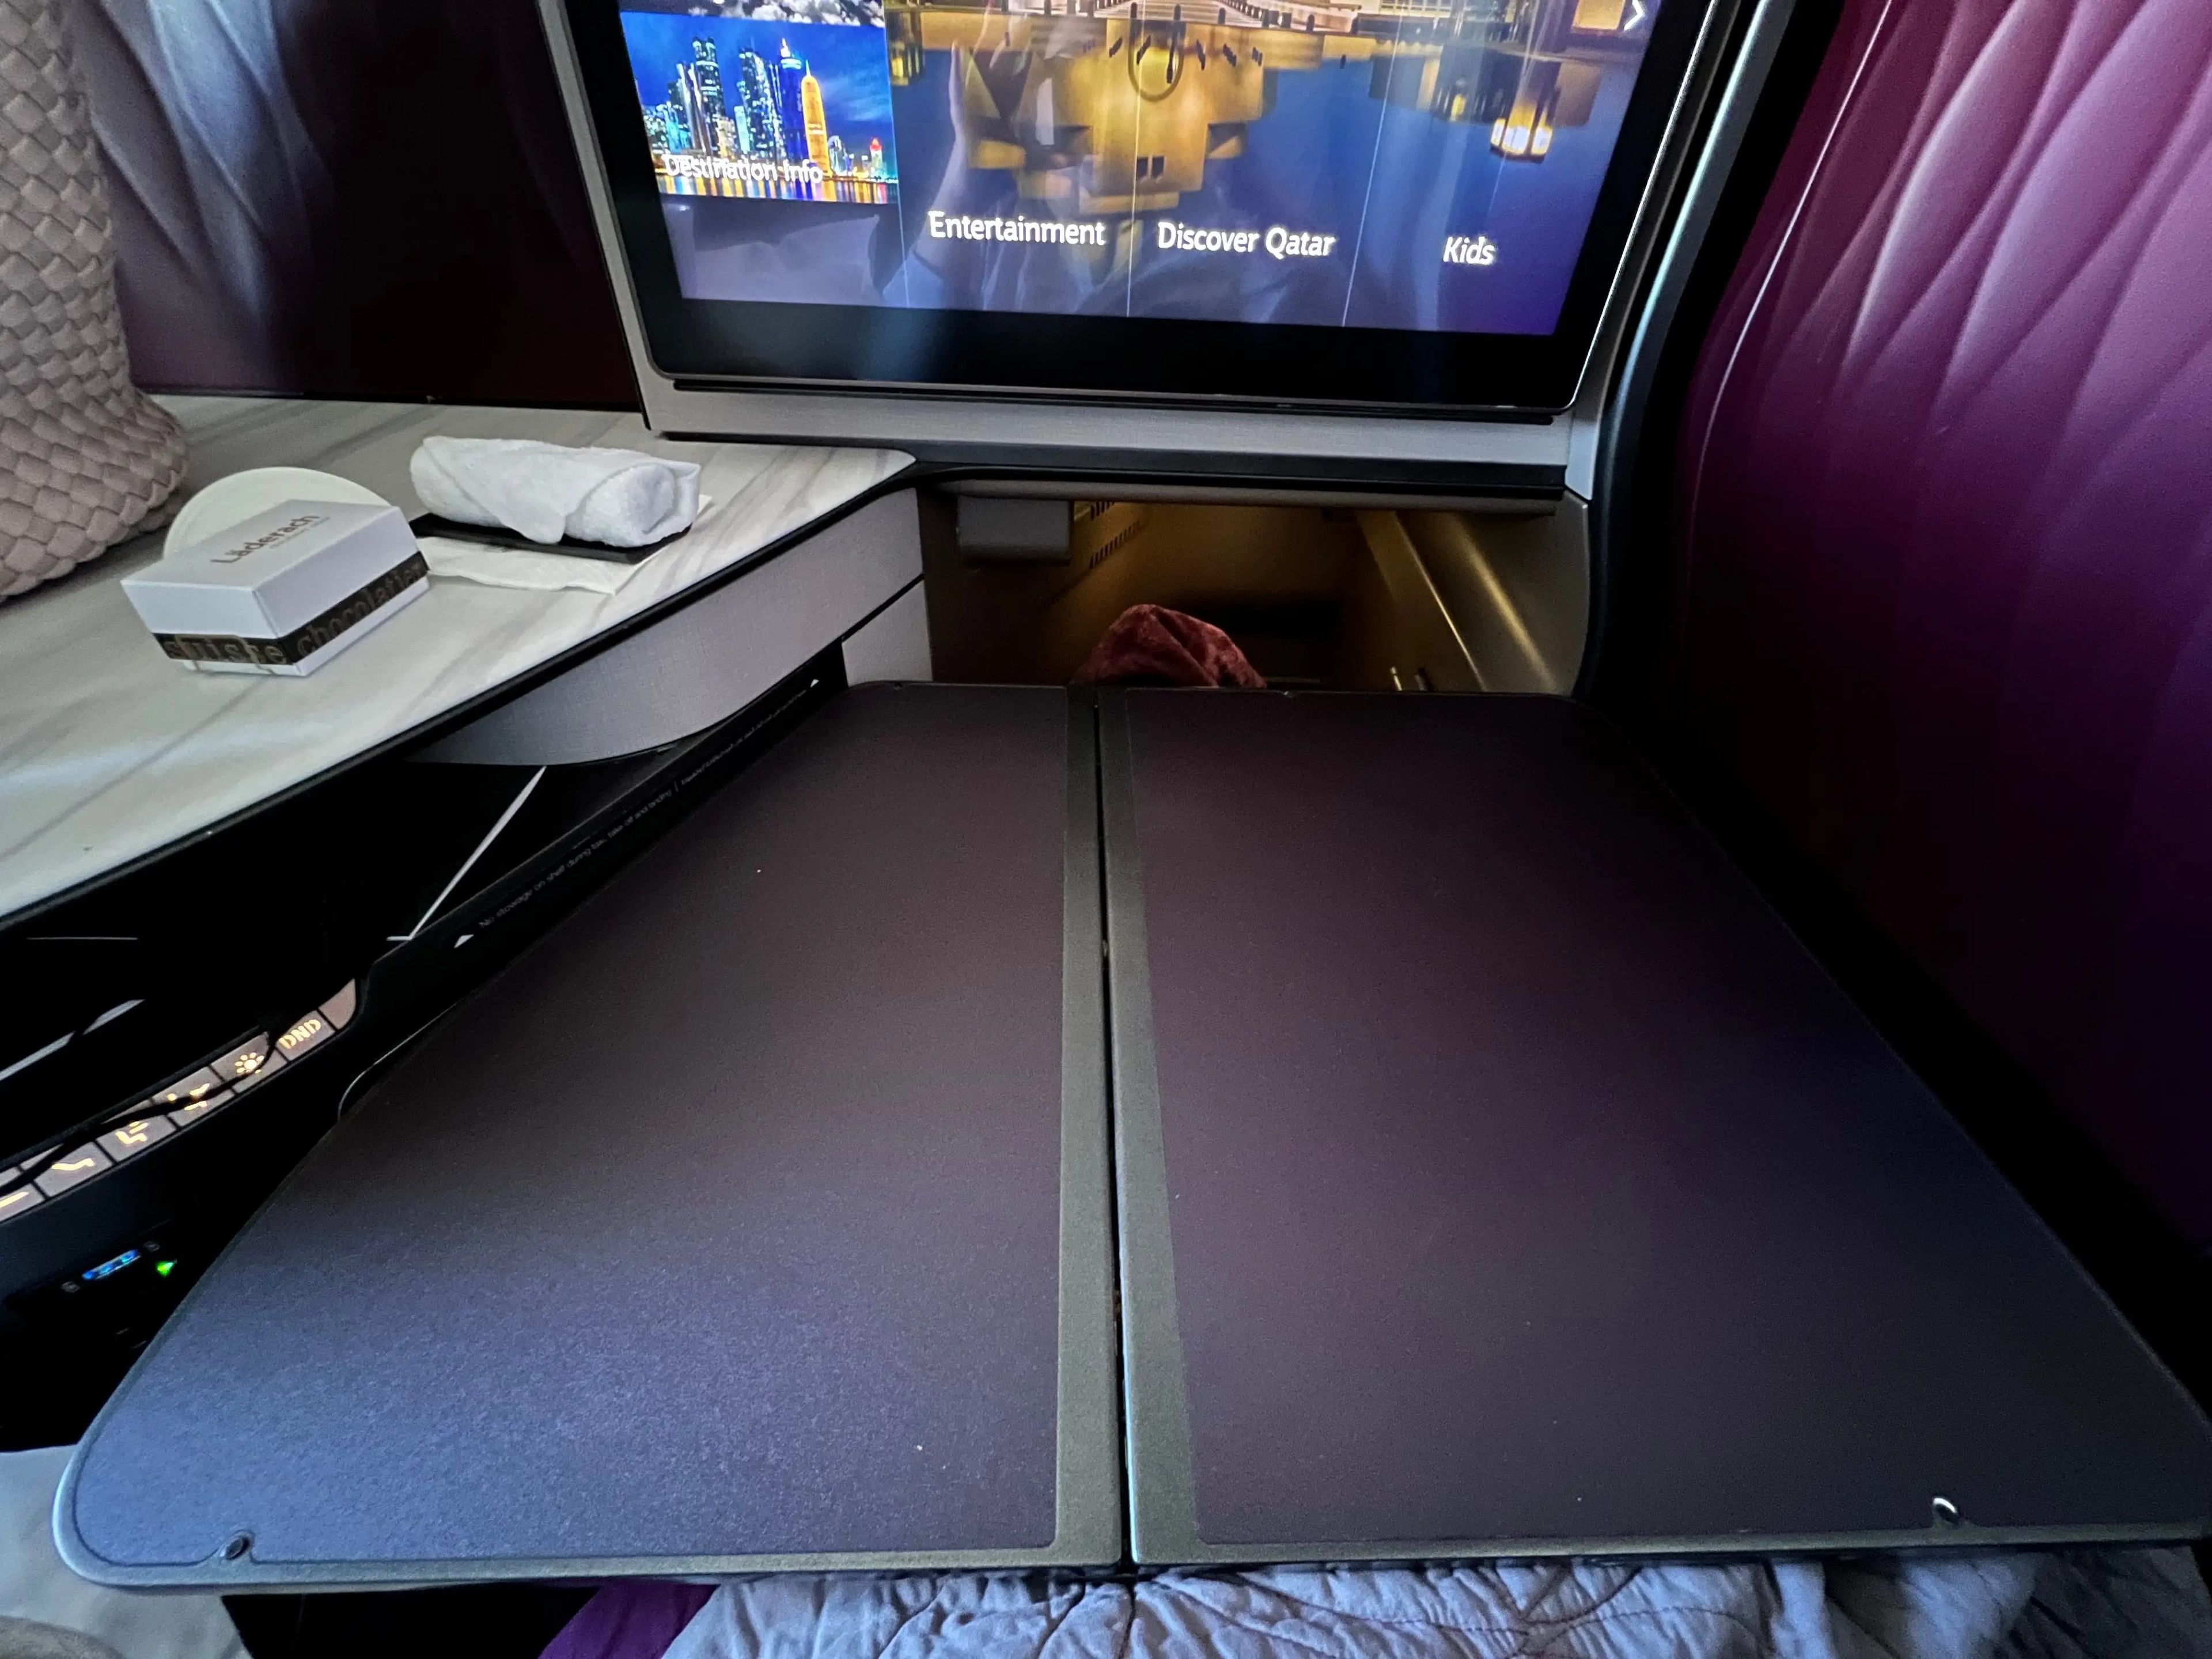 The tray table offered plenty of space to eat and drink.